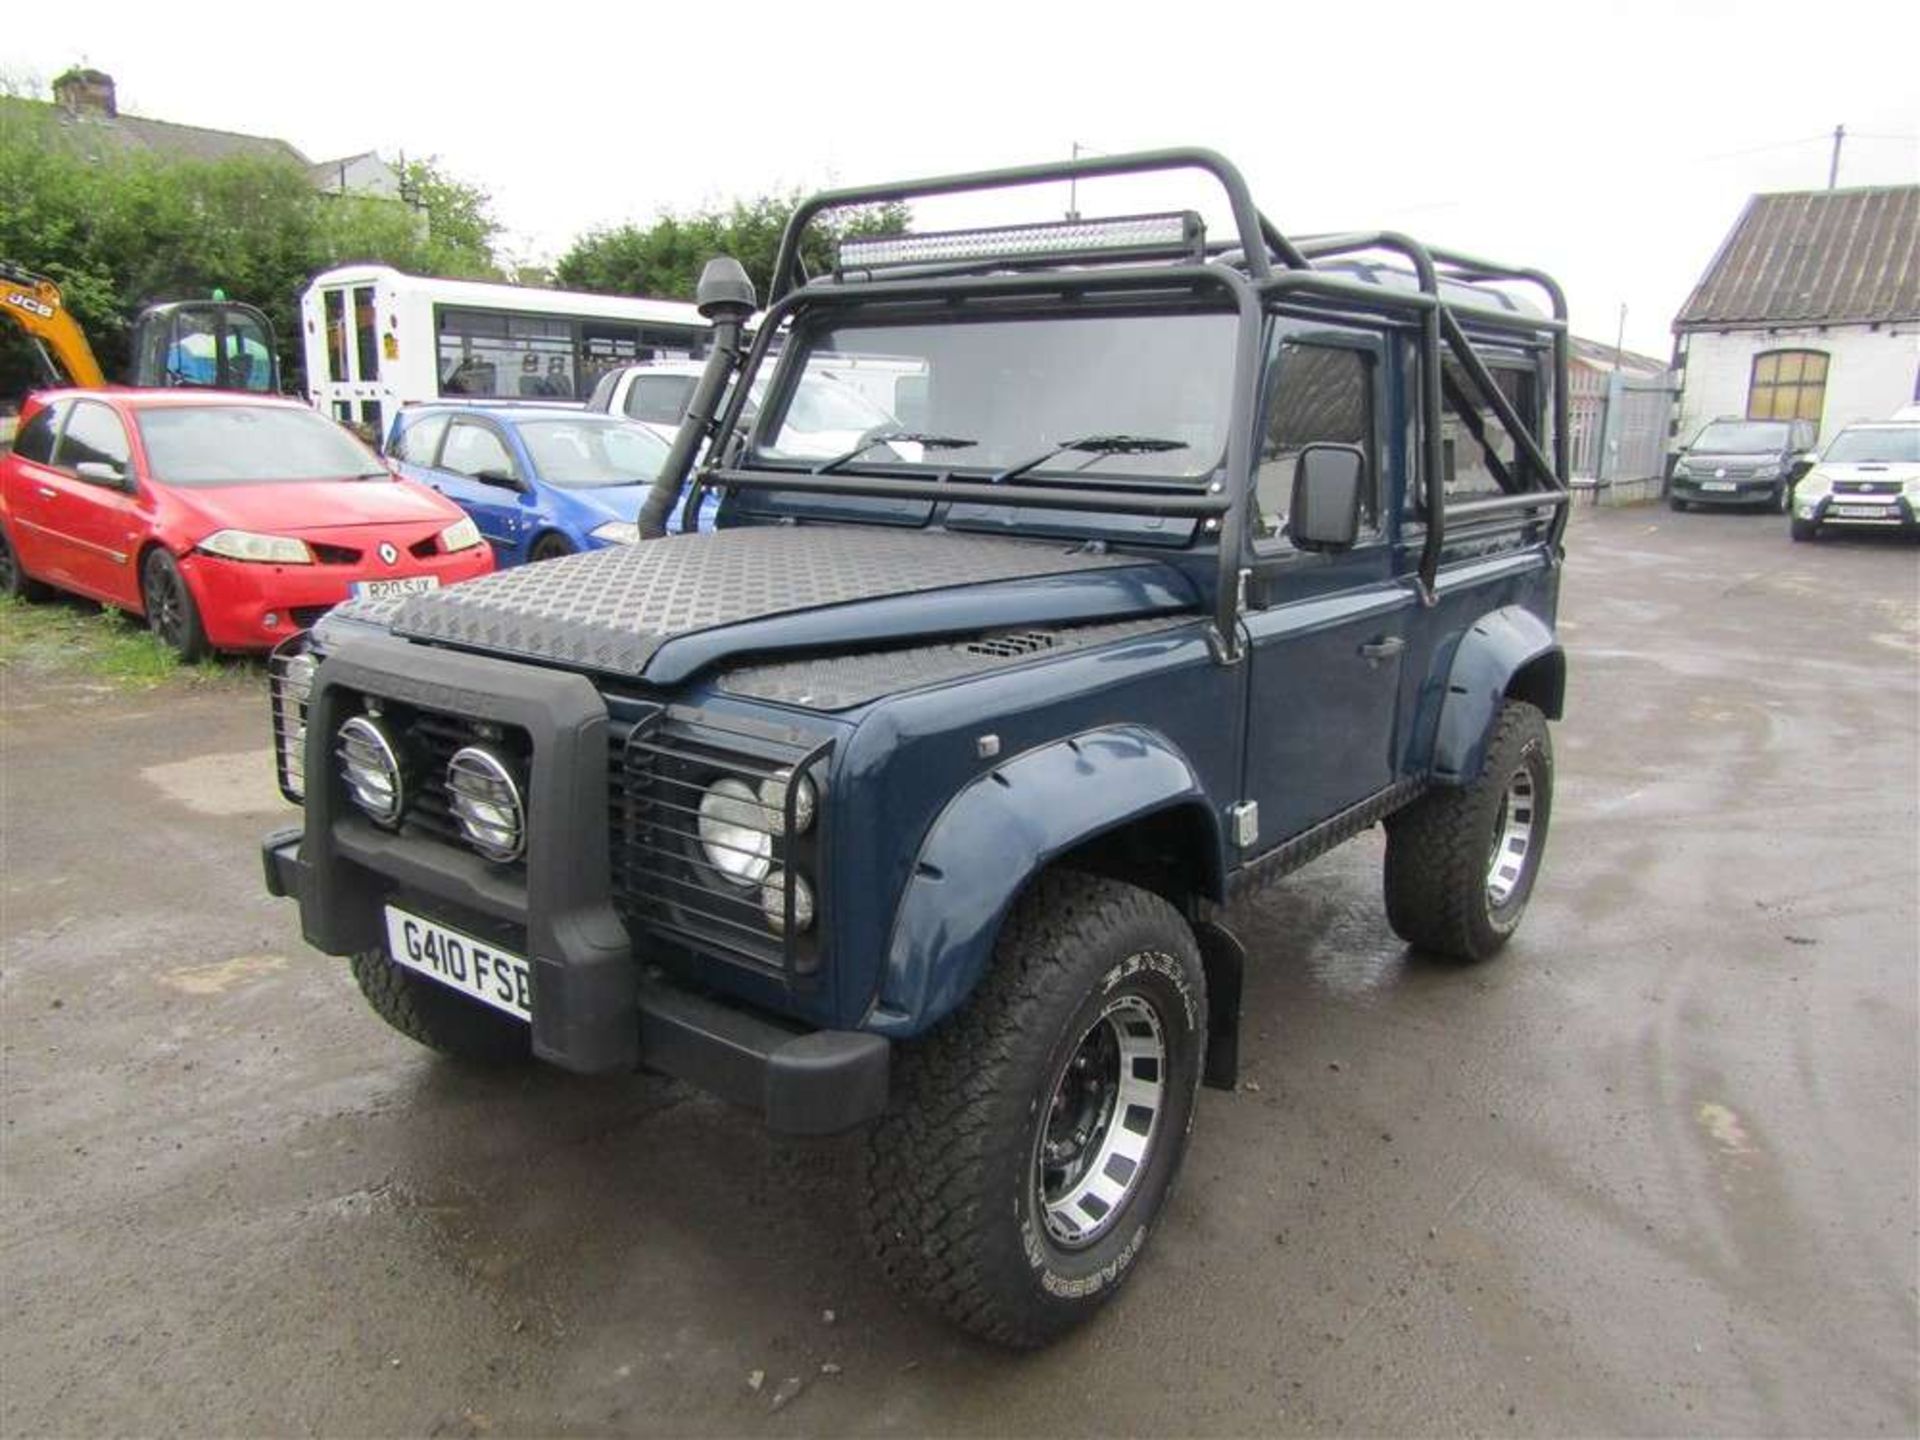 1990 G reg Landrover 90 4C SW DT - SEE ADDITIONAL INFO FOR A LIST OF EXTRAS ON THIS VEHICLE !!! - Image 2 of 6